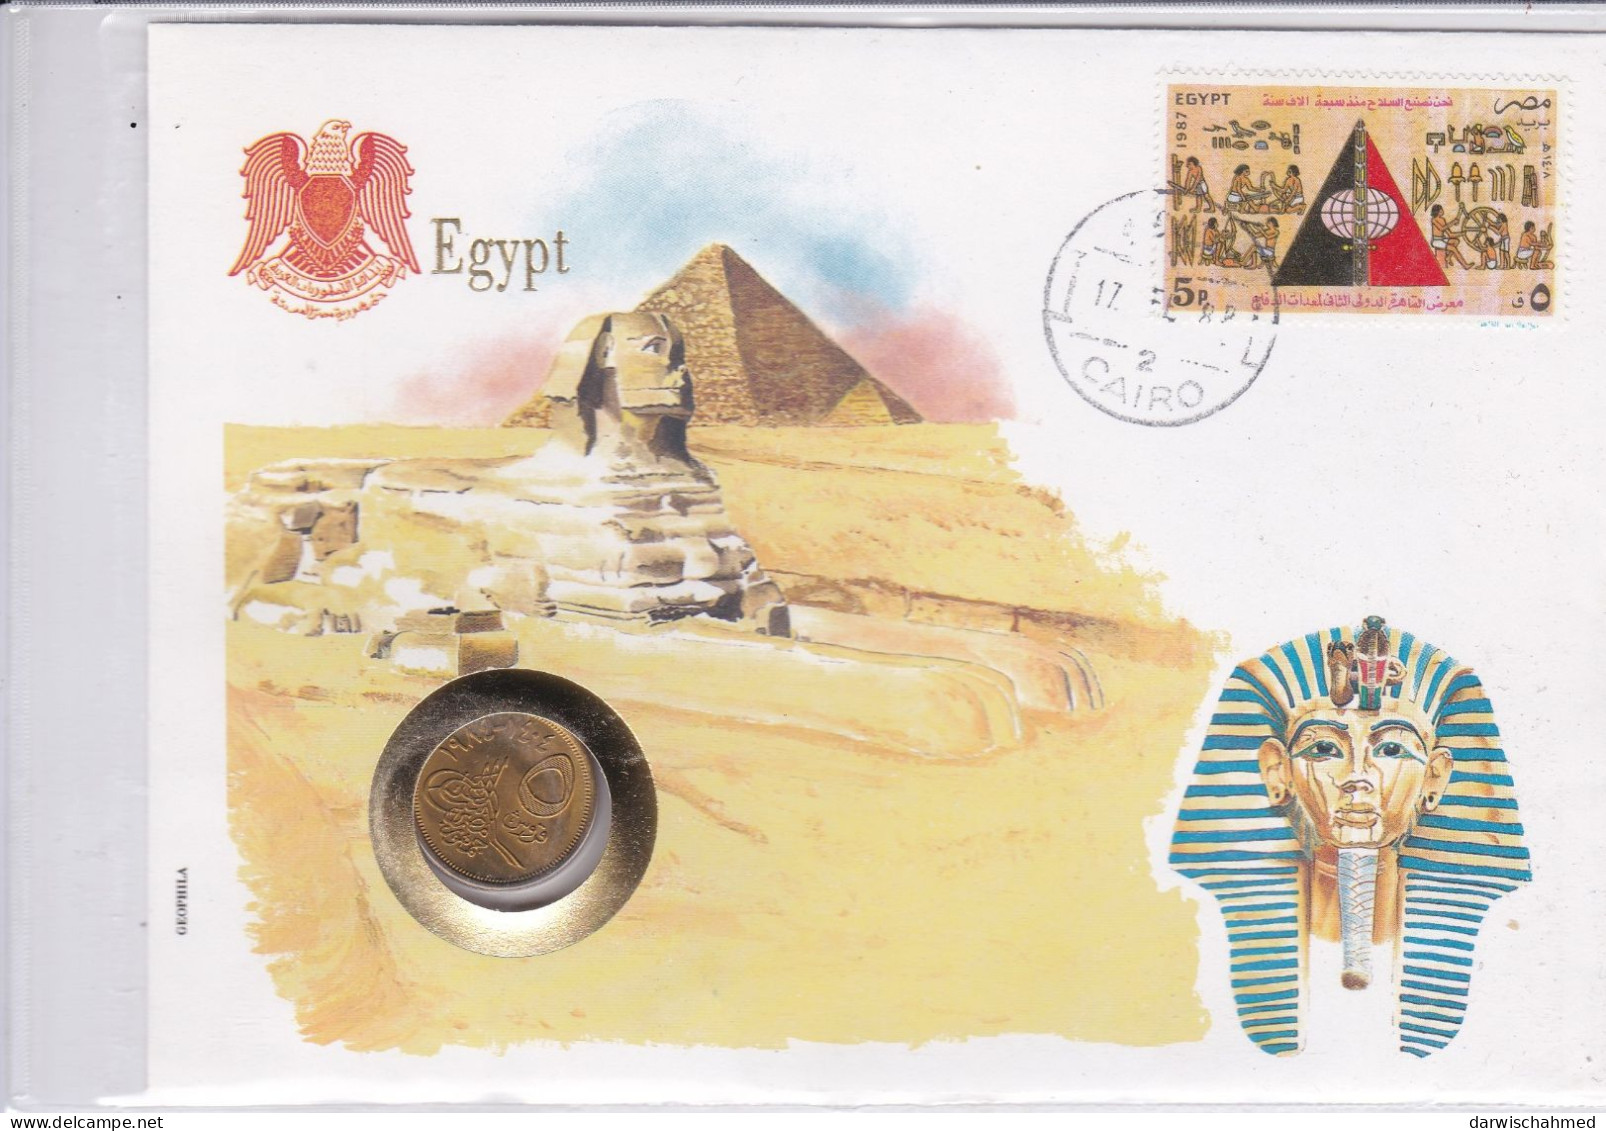 ÄGYPTEN - EGYPT - EGYPTIAN - ÄGYPTOLOGIE  - COIN AND STAMP - BYRAMIDE- NOMIS  BRIEFE  FDC - Covers & Documents